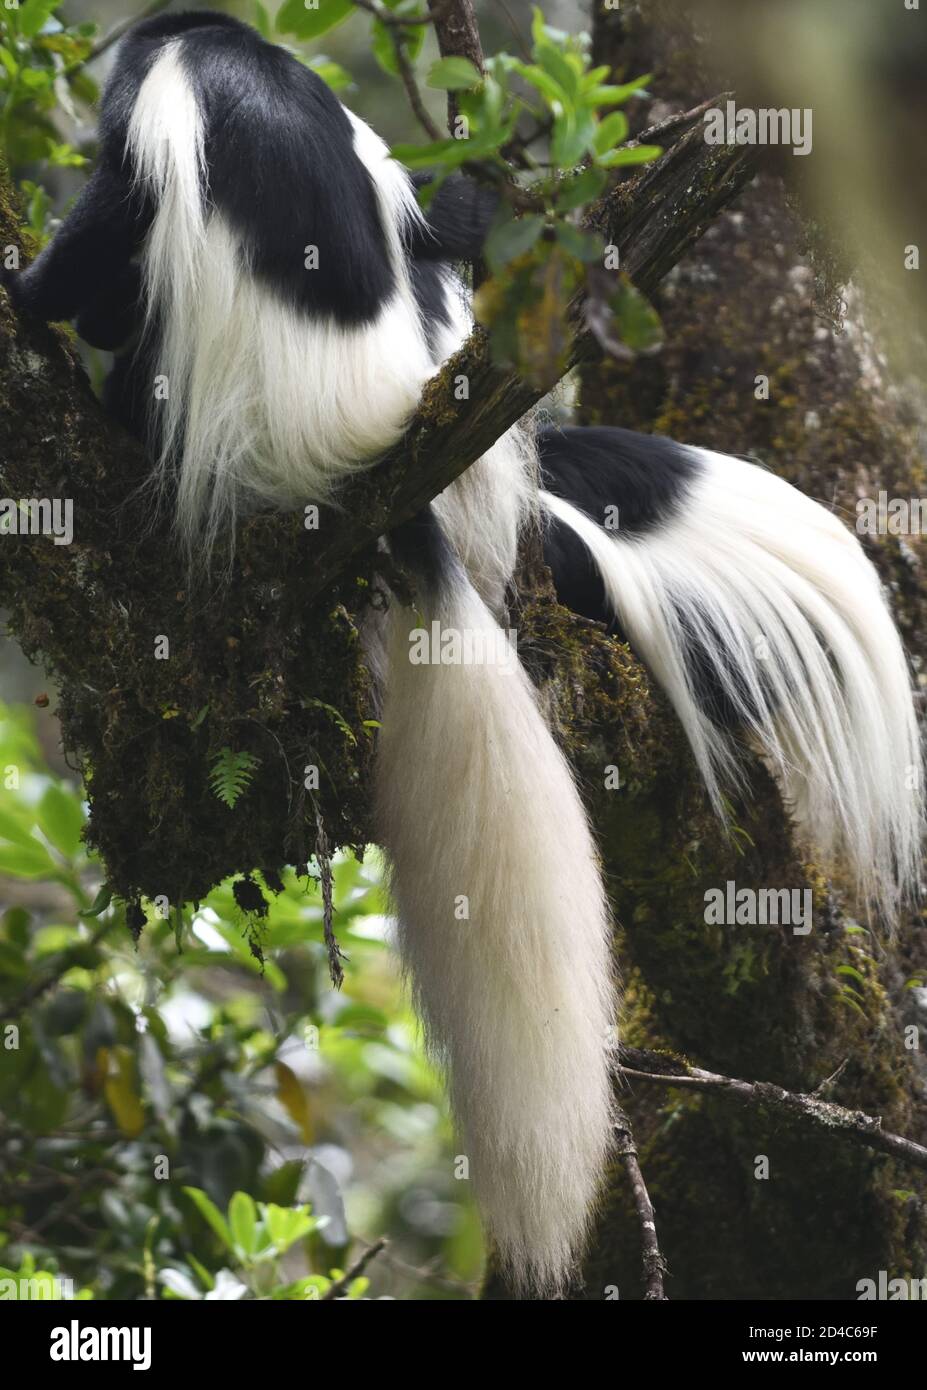 The backs  of black and white colobus monkeys, the mantled guereza (Colobus guereza) display their thick white mantels, necessary to keep warm on the Stock Photo